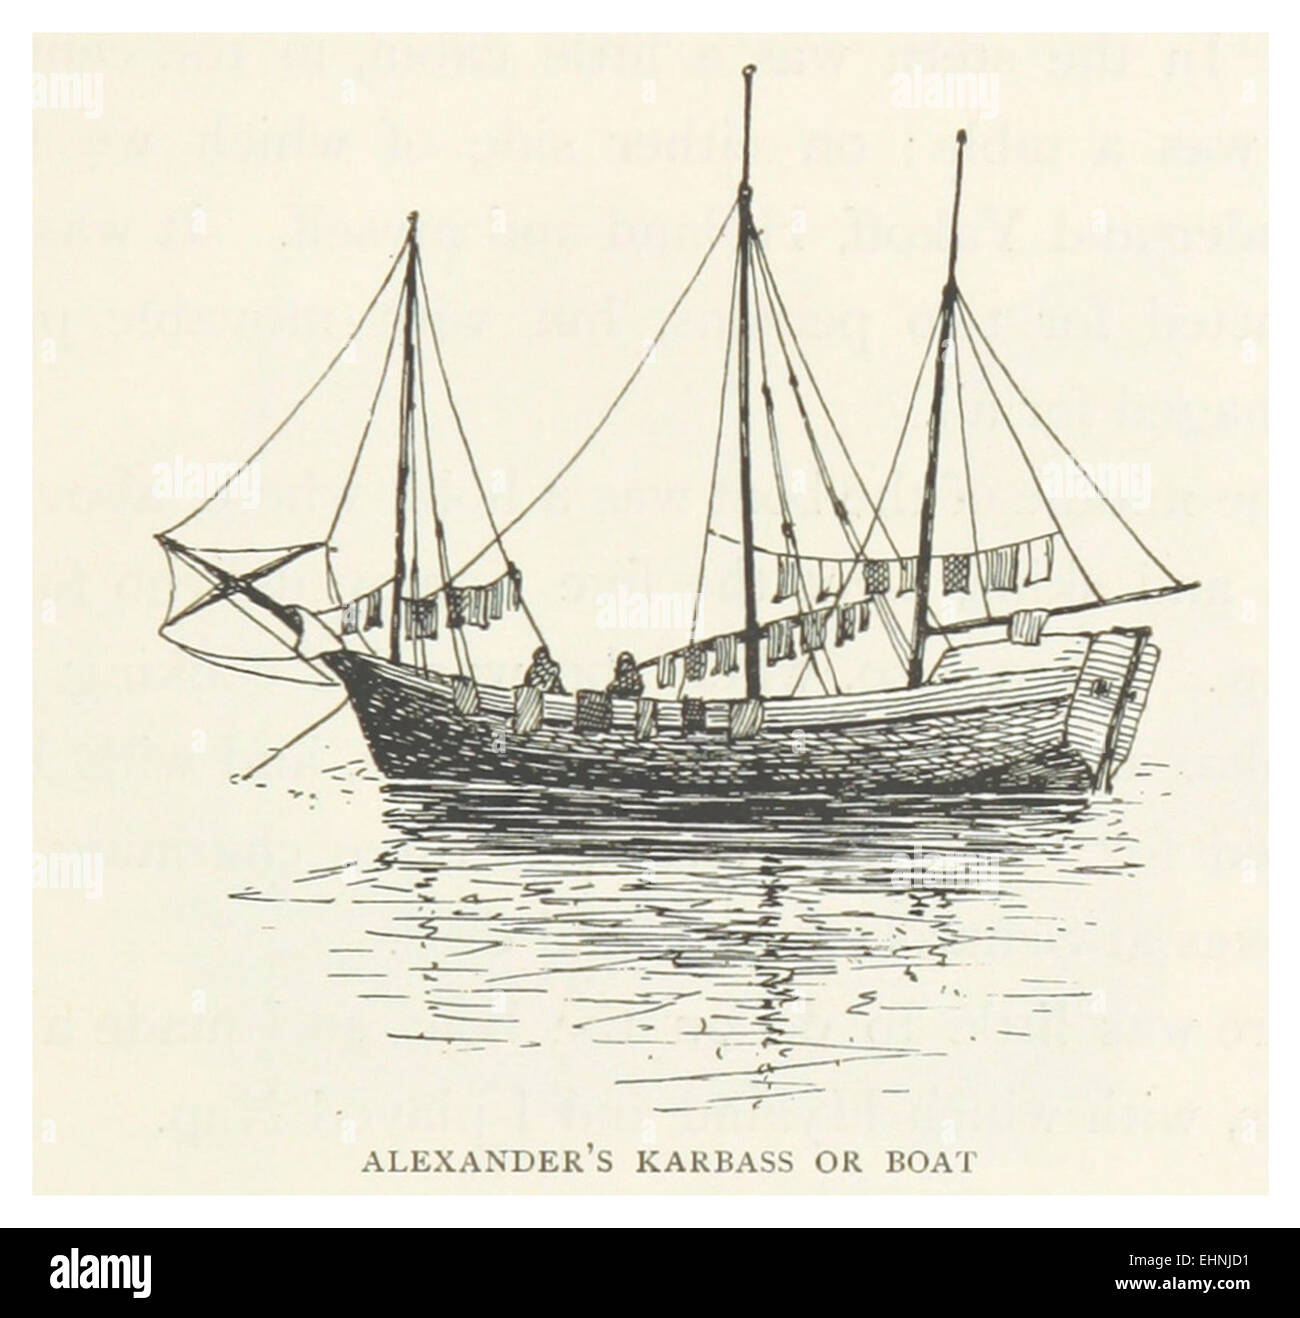 TB(1895) p487 ALEXANDER'S KARBASS (or boat) Stock Photo